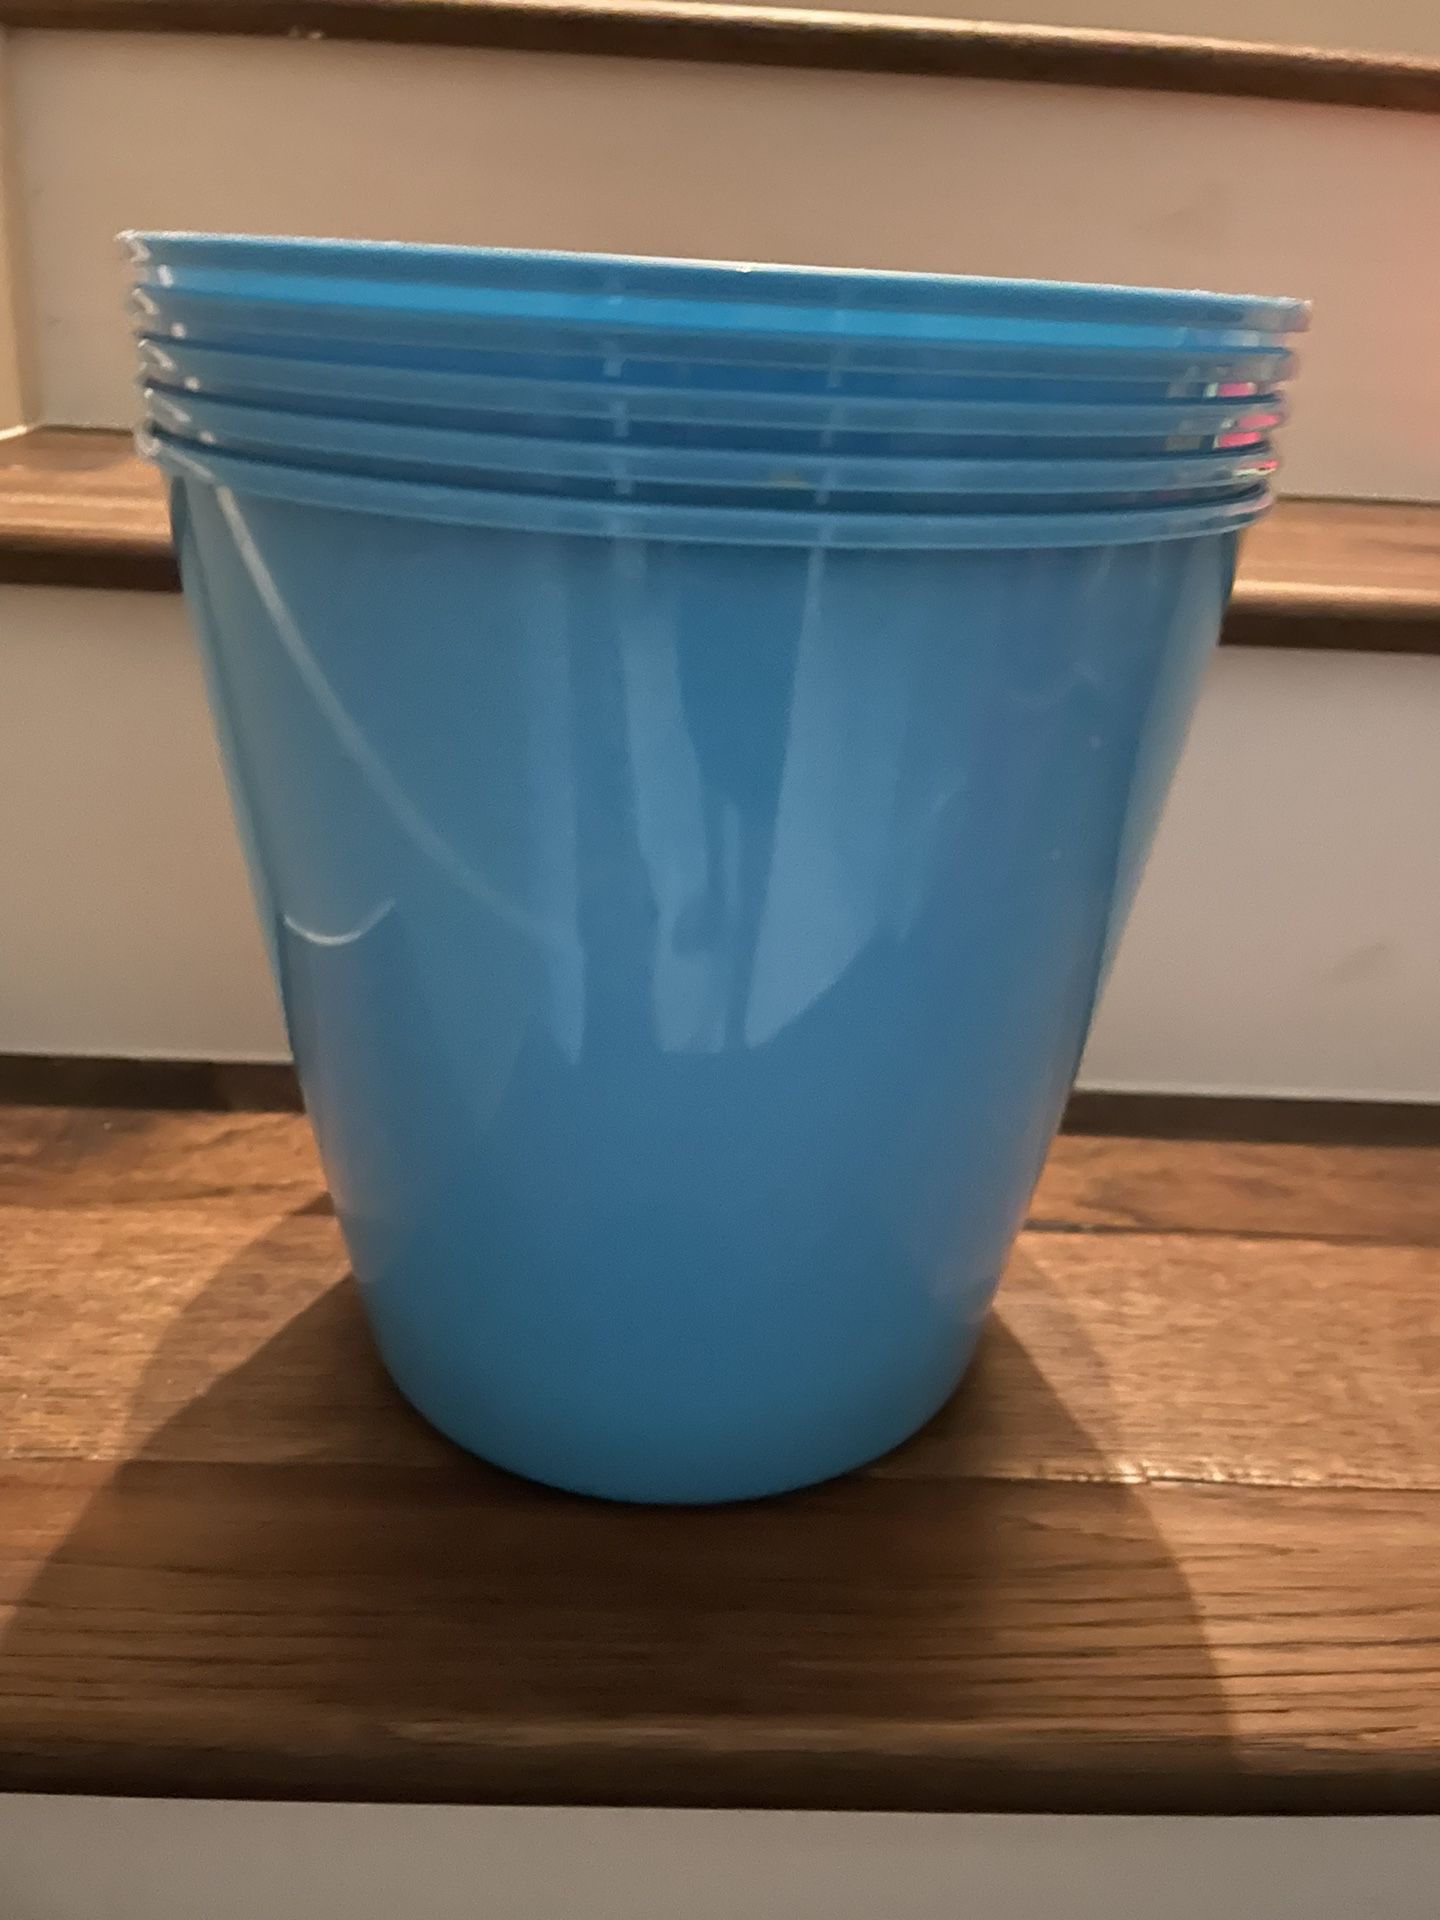 New Blue Trash Can